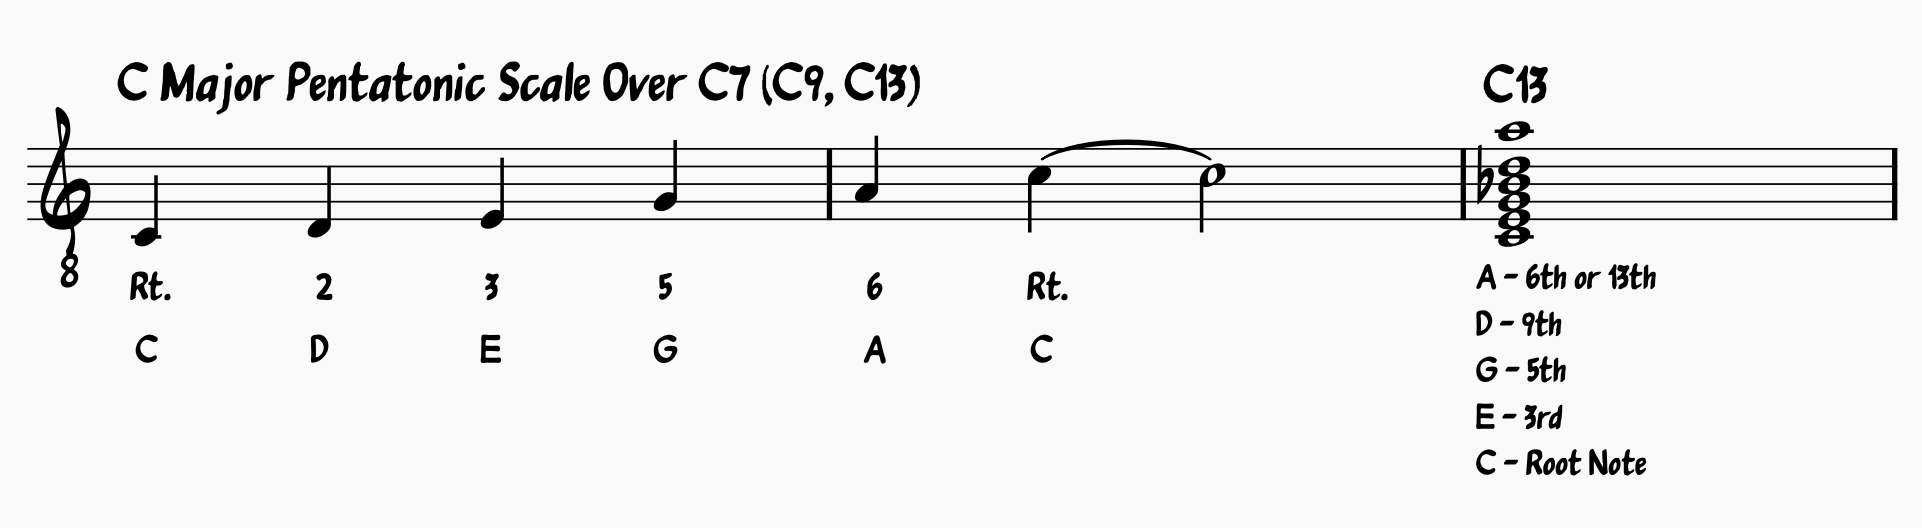 Blues Scale Guide: C Major Pentatonic Scale or A minor Pentatonic Scale over C7, C9 and C13 Chords